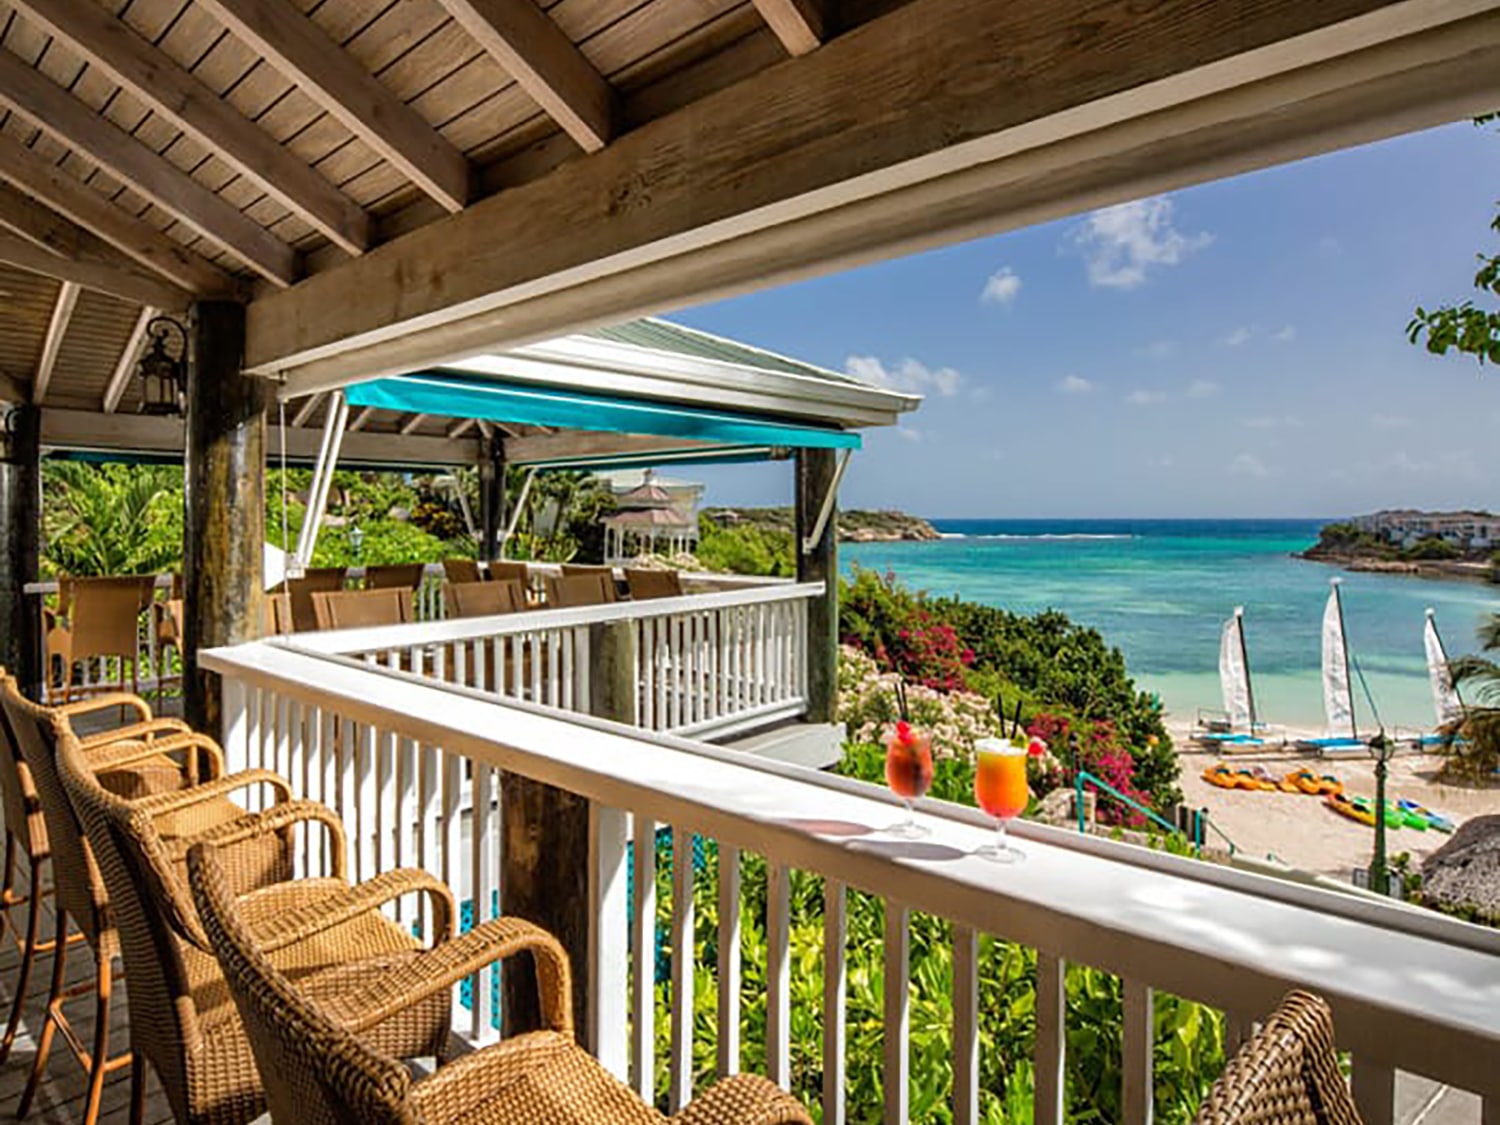 The Beach Bar at Verandah Resort and Spa offers incredible views of the island, paired with delicious signature cocktails.